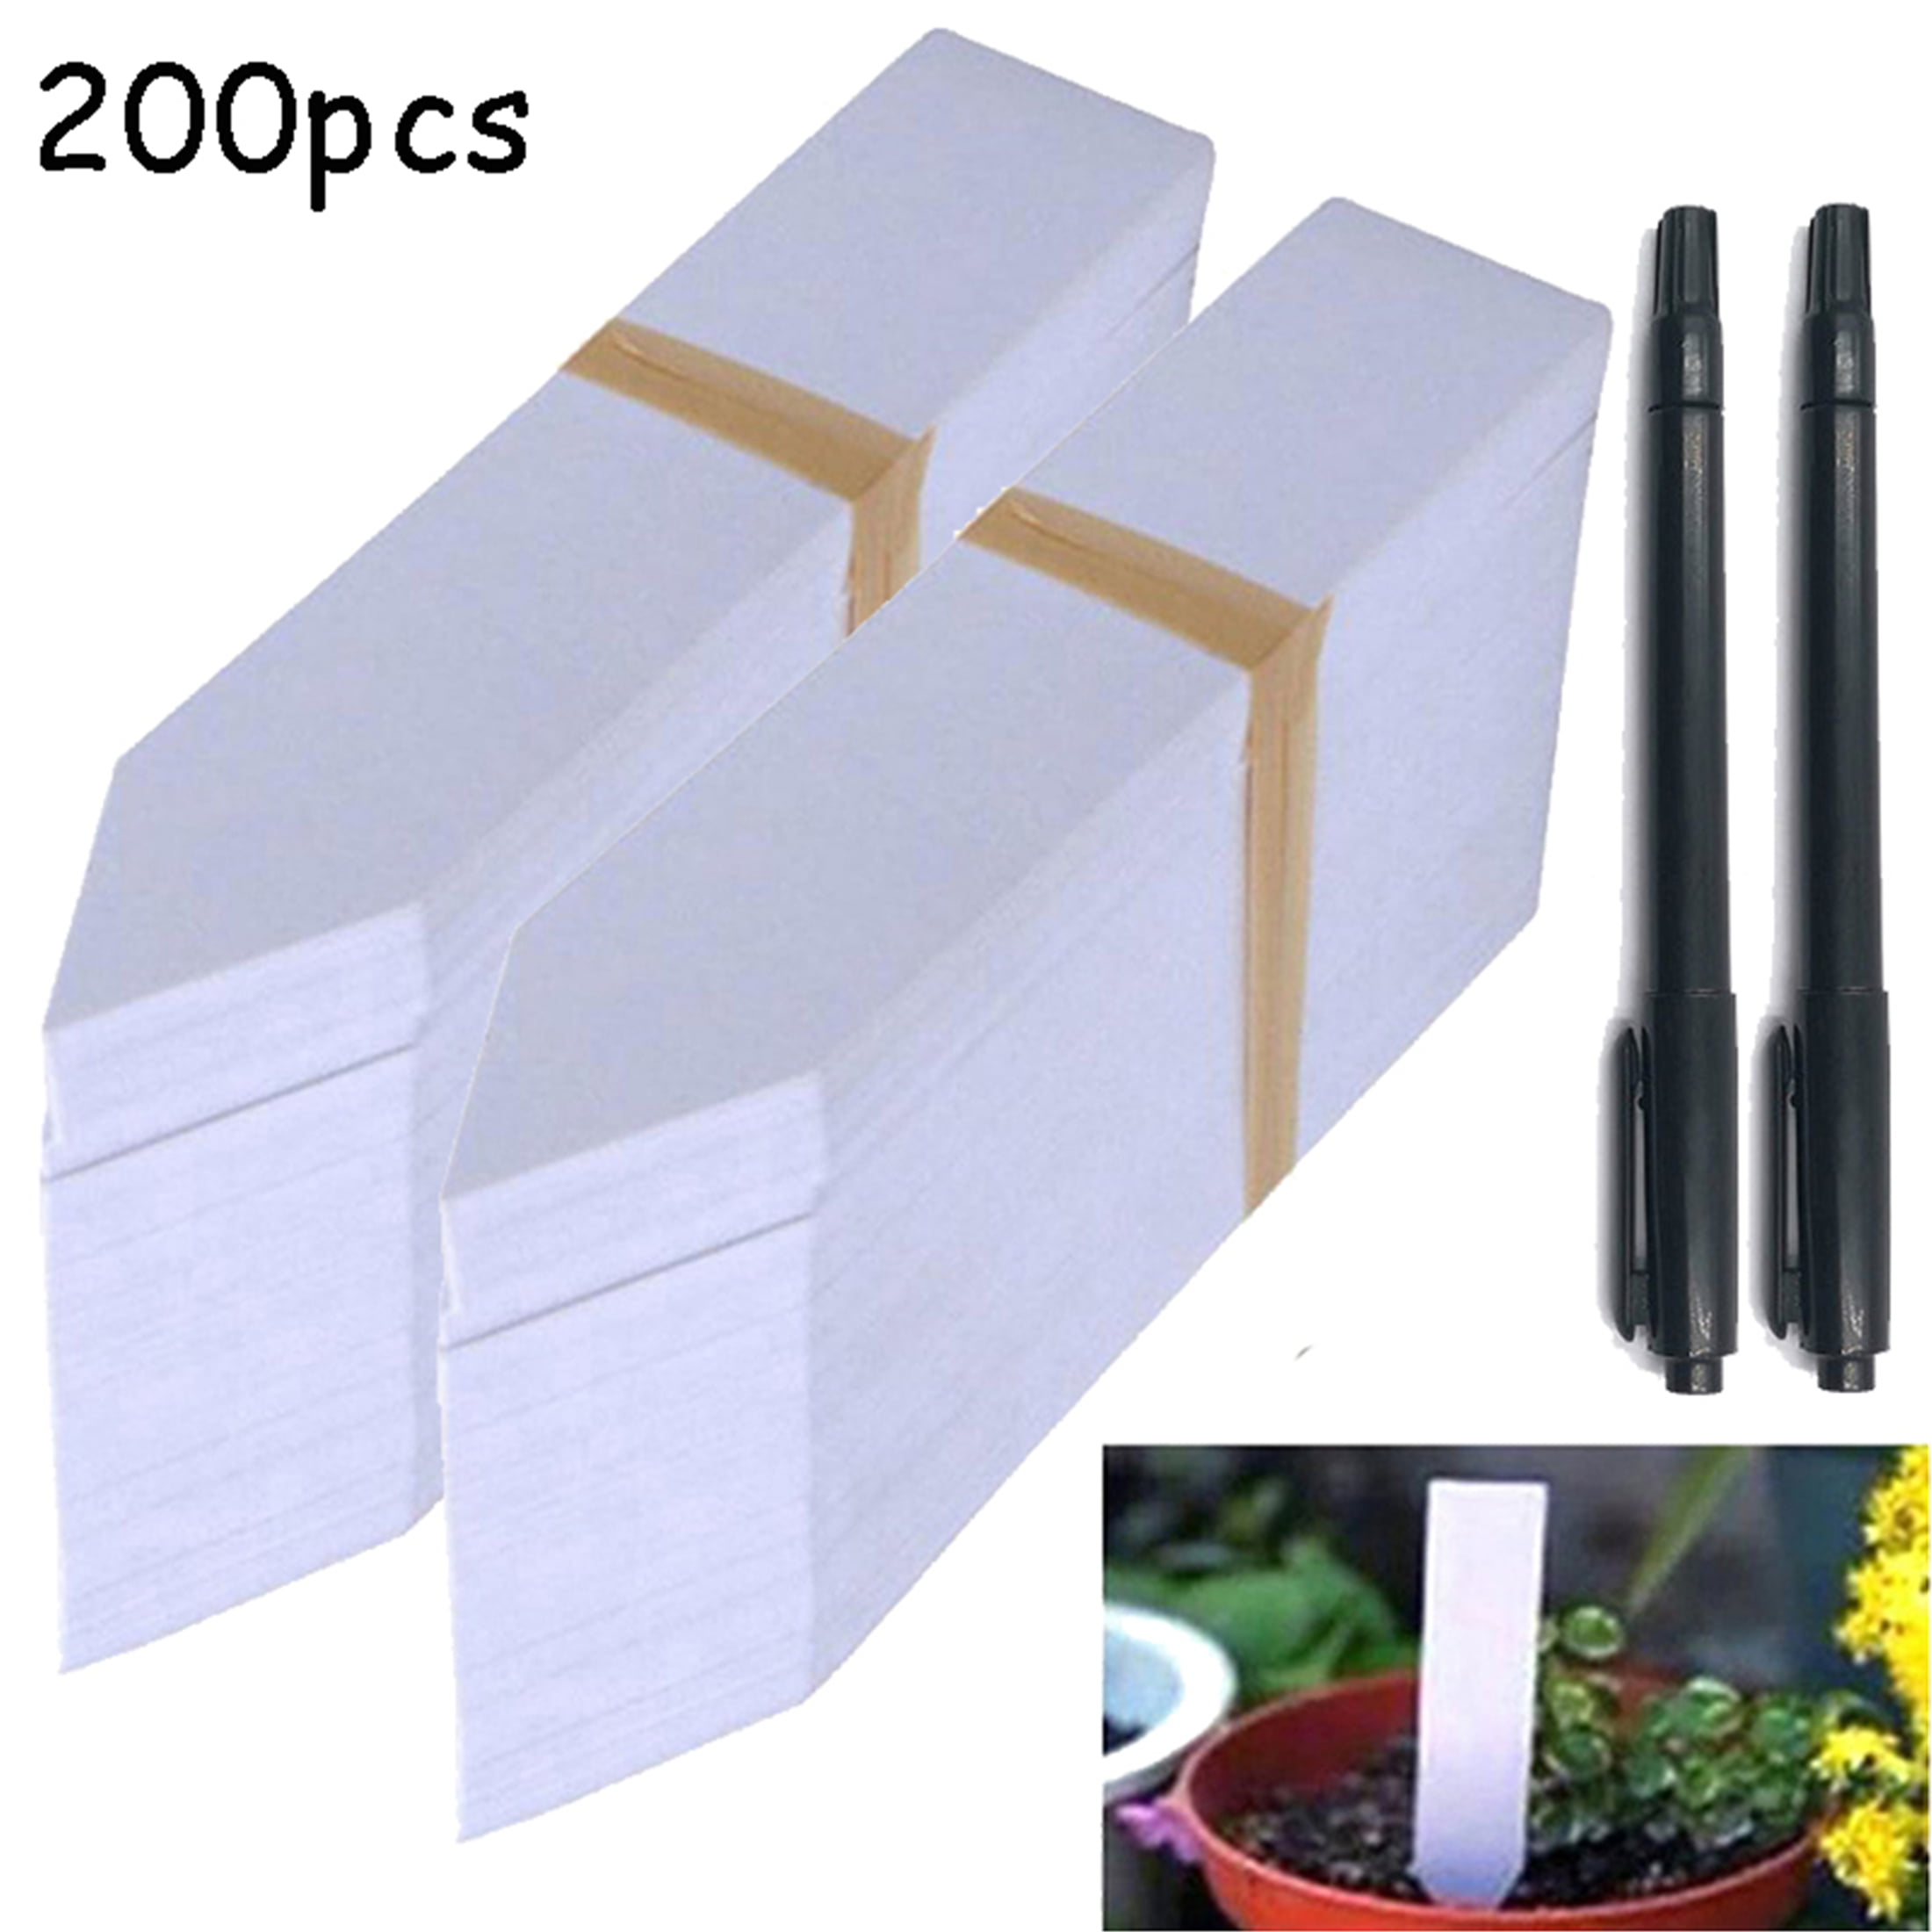 Details about   100* Plastic Plant Stakes Markers Waterproof Garden Nursery Plant Tags I7G4 